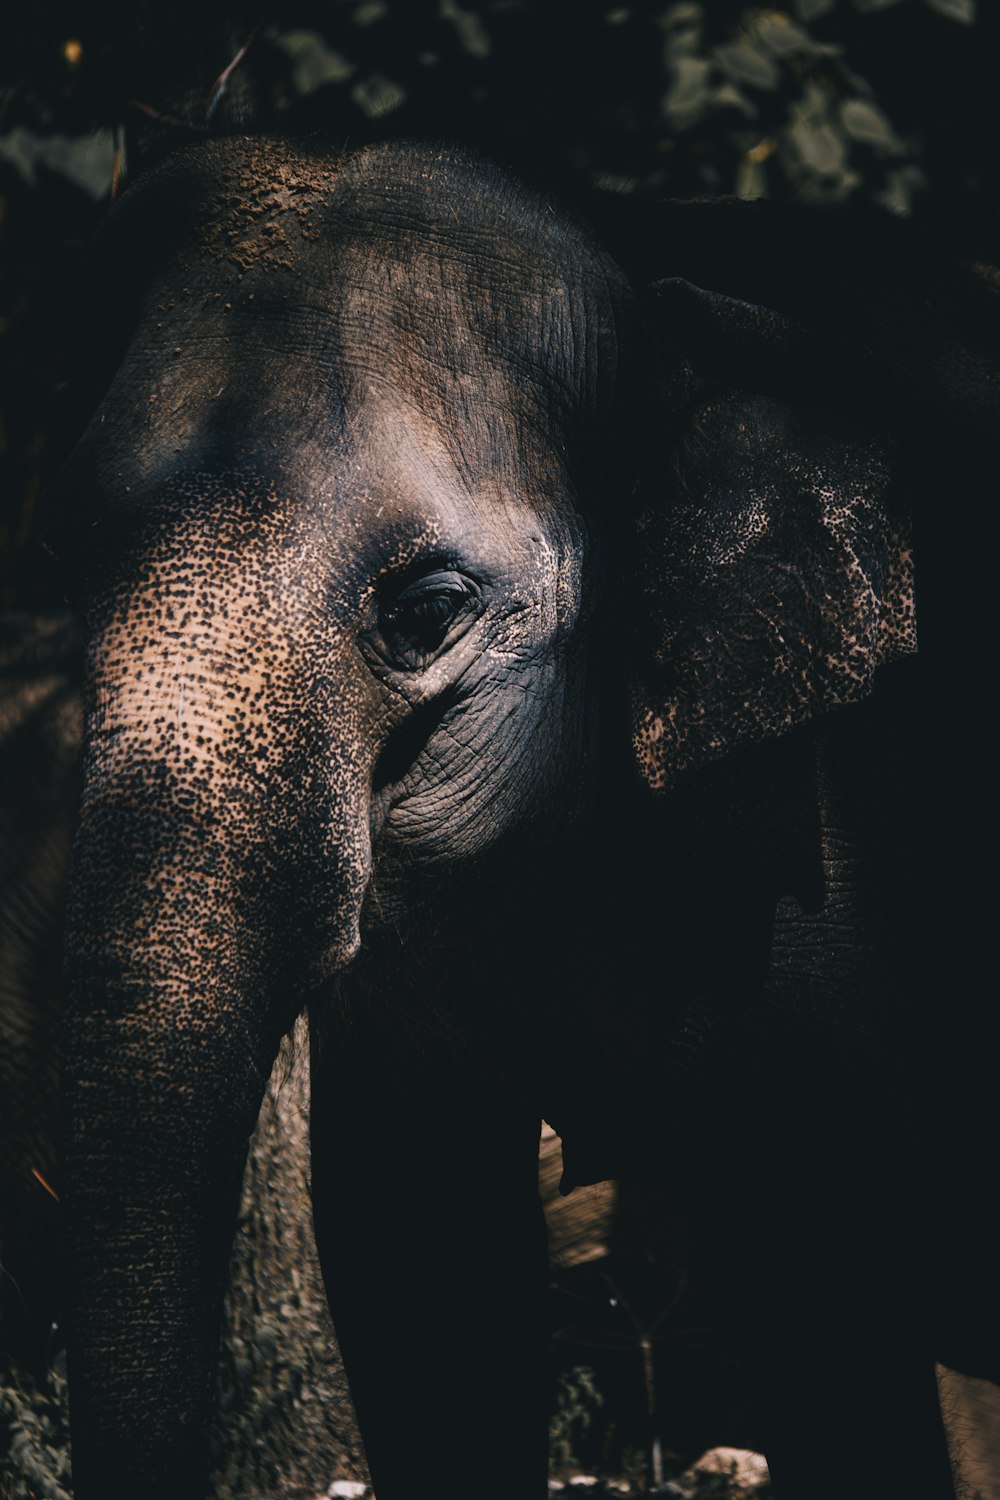 a close up of an elephant's face and trunk